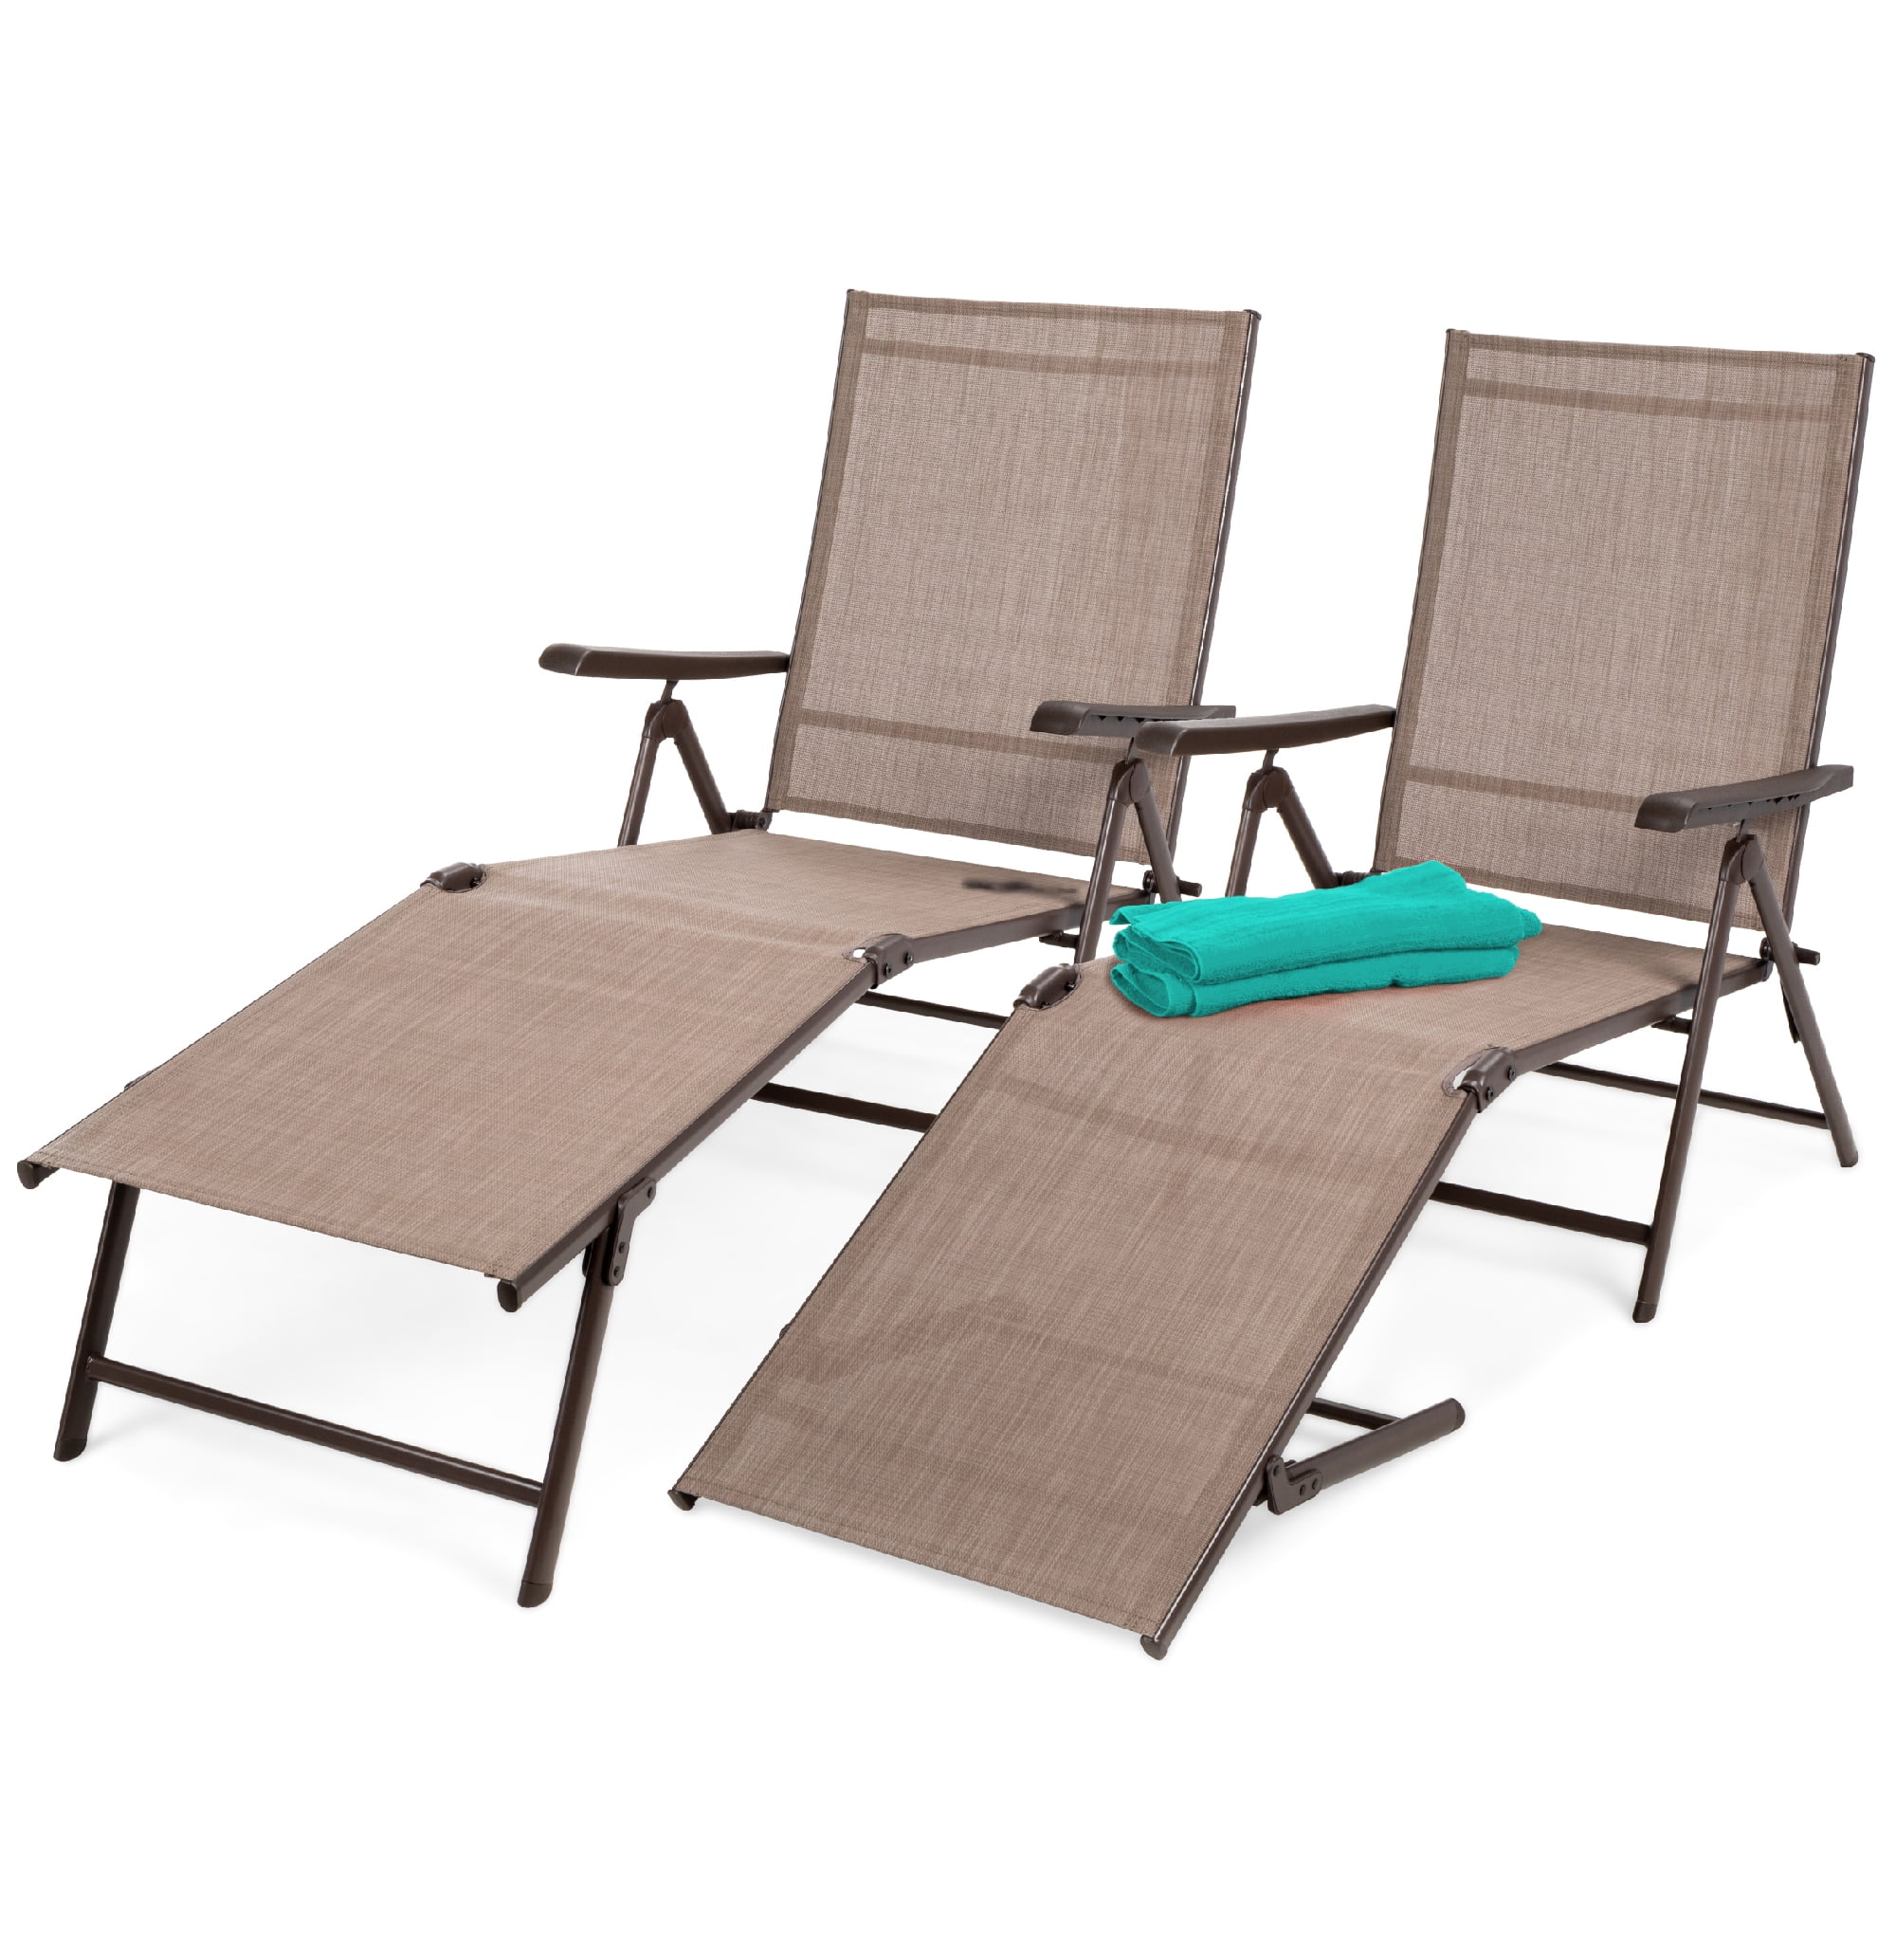 Best Products Set of 2 Outdoor Patio Chaise Lounge Chair Adjustable Folding Pool Lounger w/ Steel Frame - Gray - Walmart.com